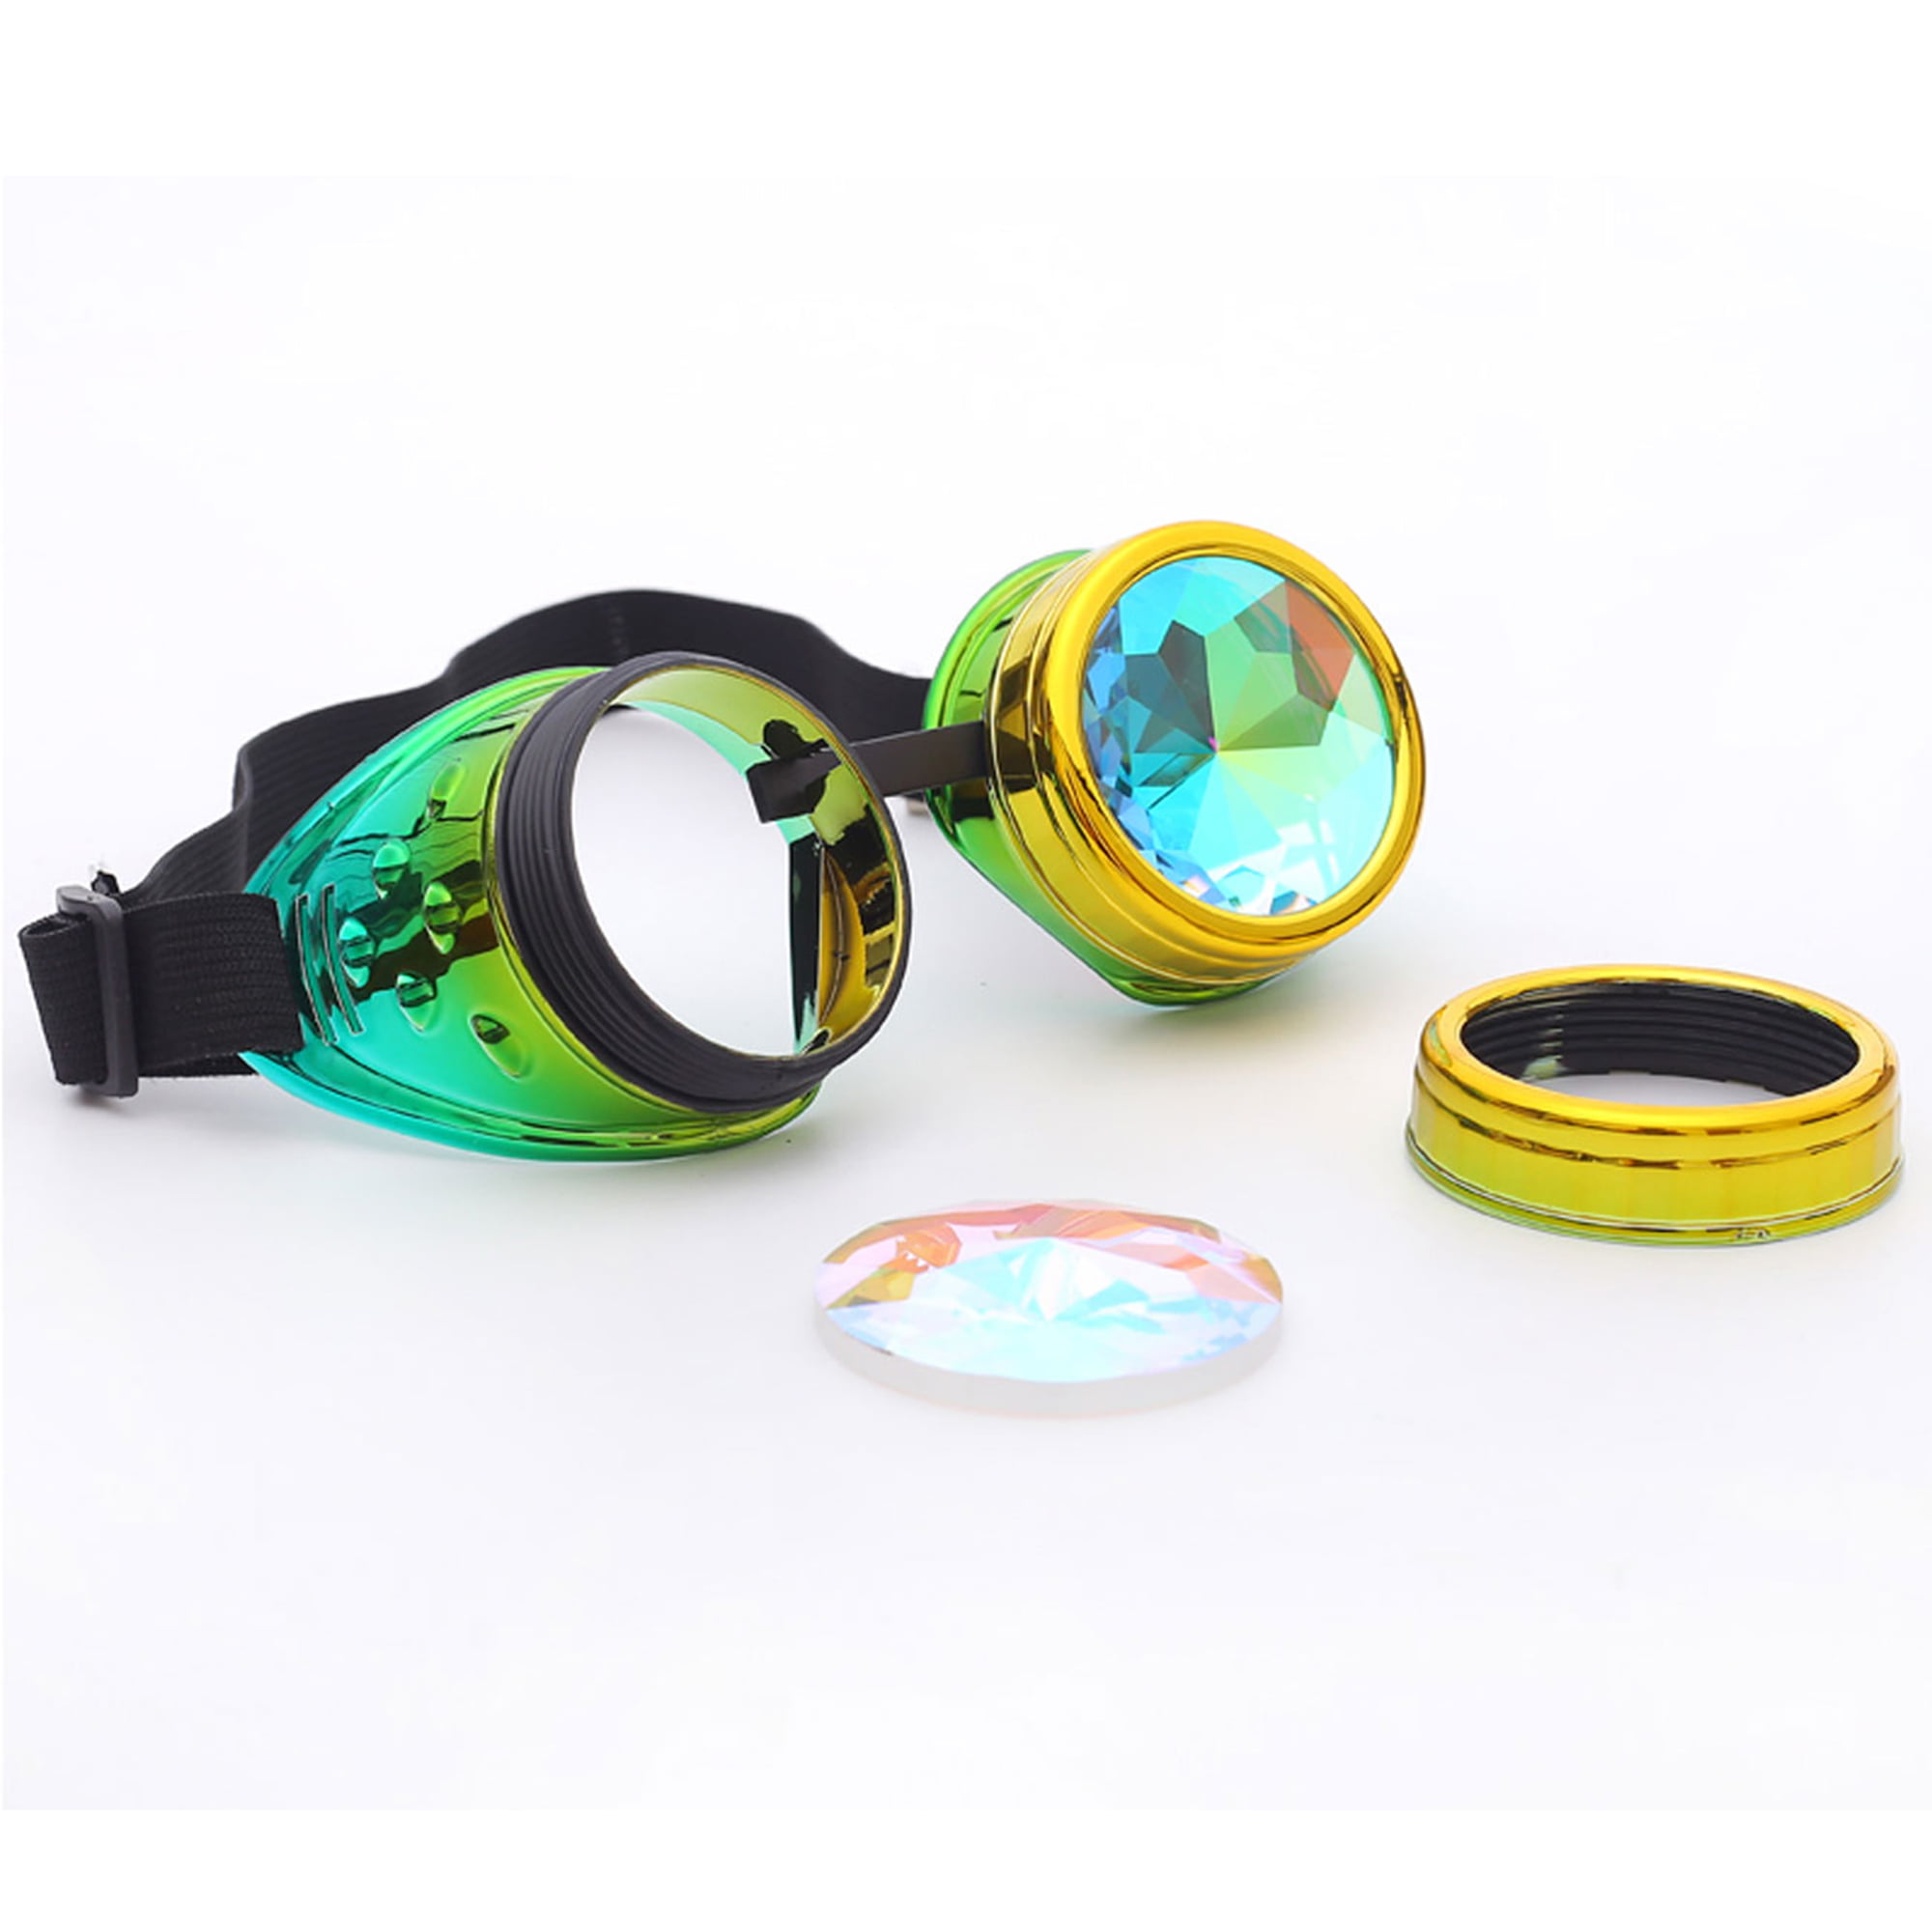 FIRSTLIKE Kaleidoscope Rave Goggles Steampunk Glasses with Rainbow Crystal Glass Lens 